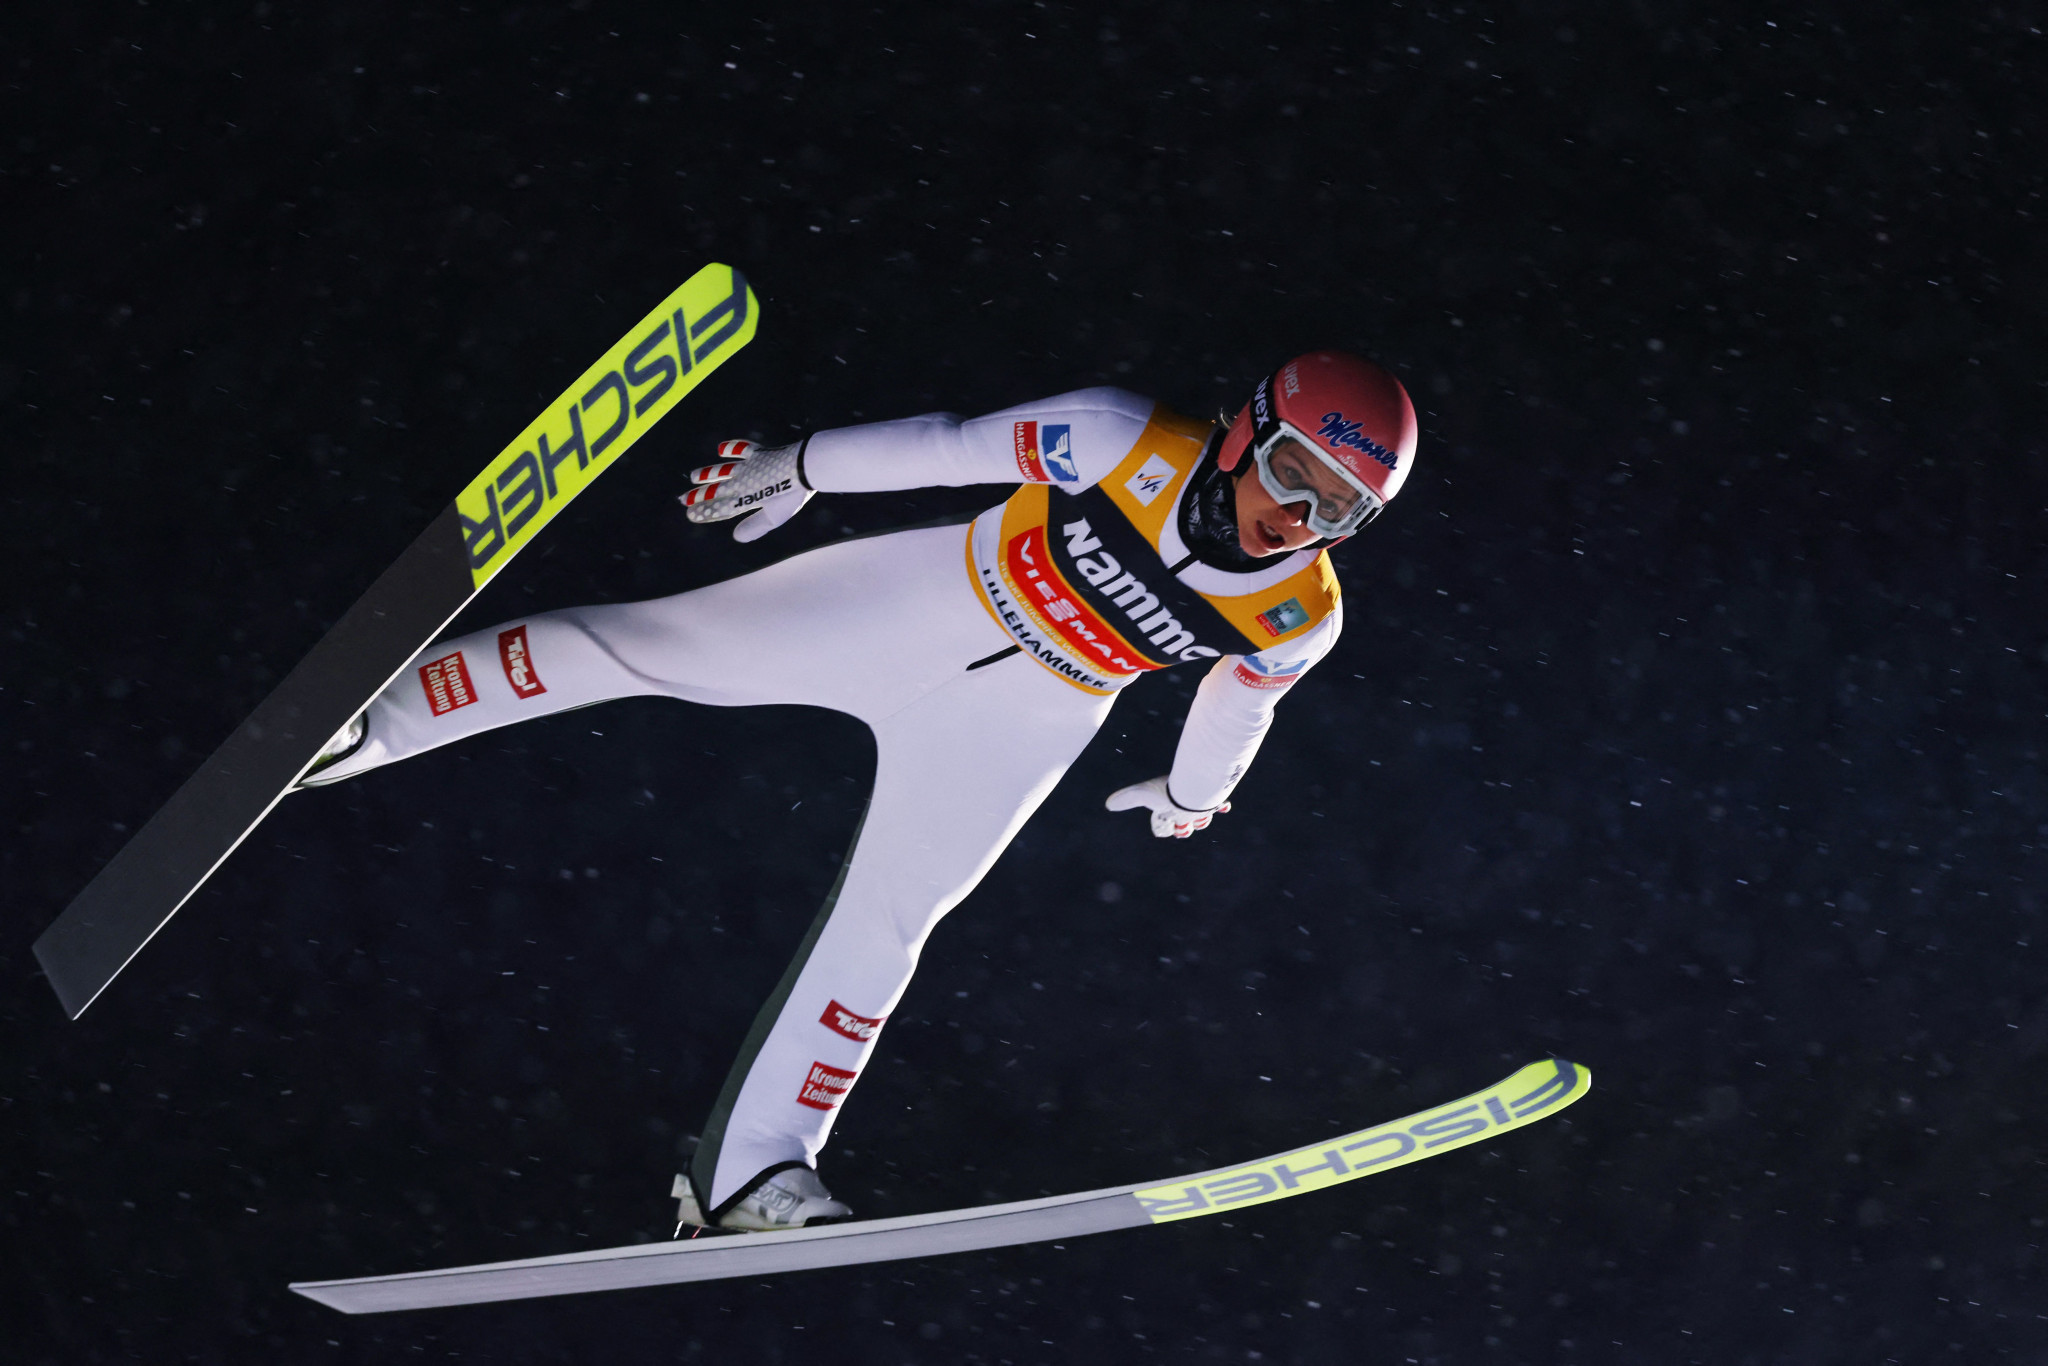 Kramer bids for another Ski Jumping World Cup victory at Klingenthal